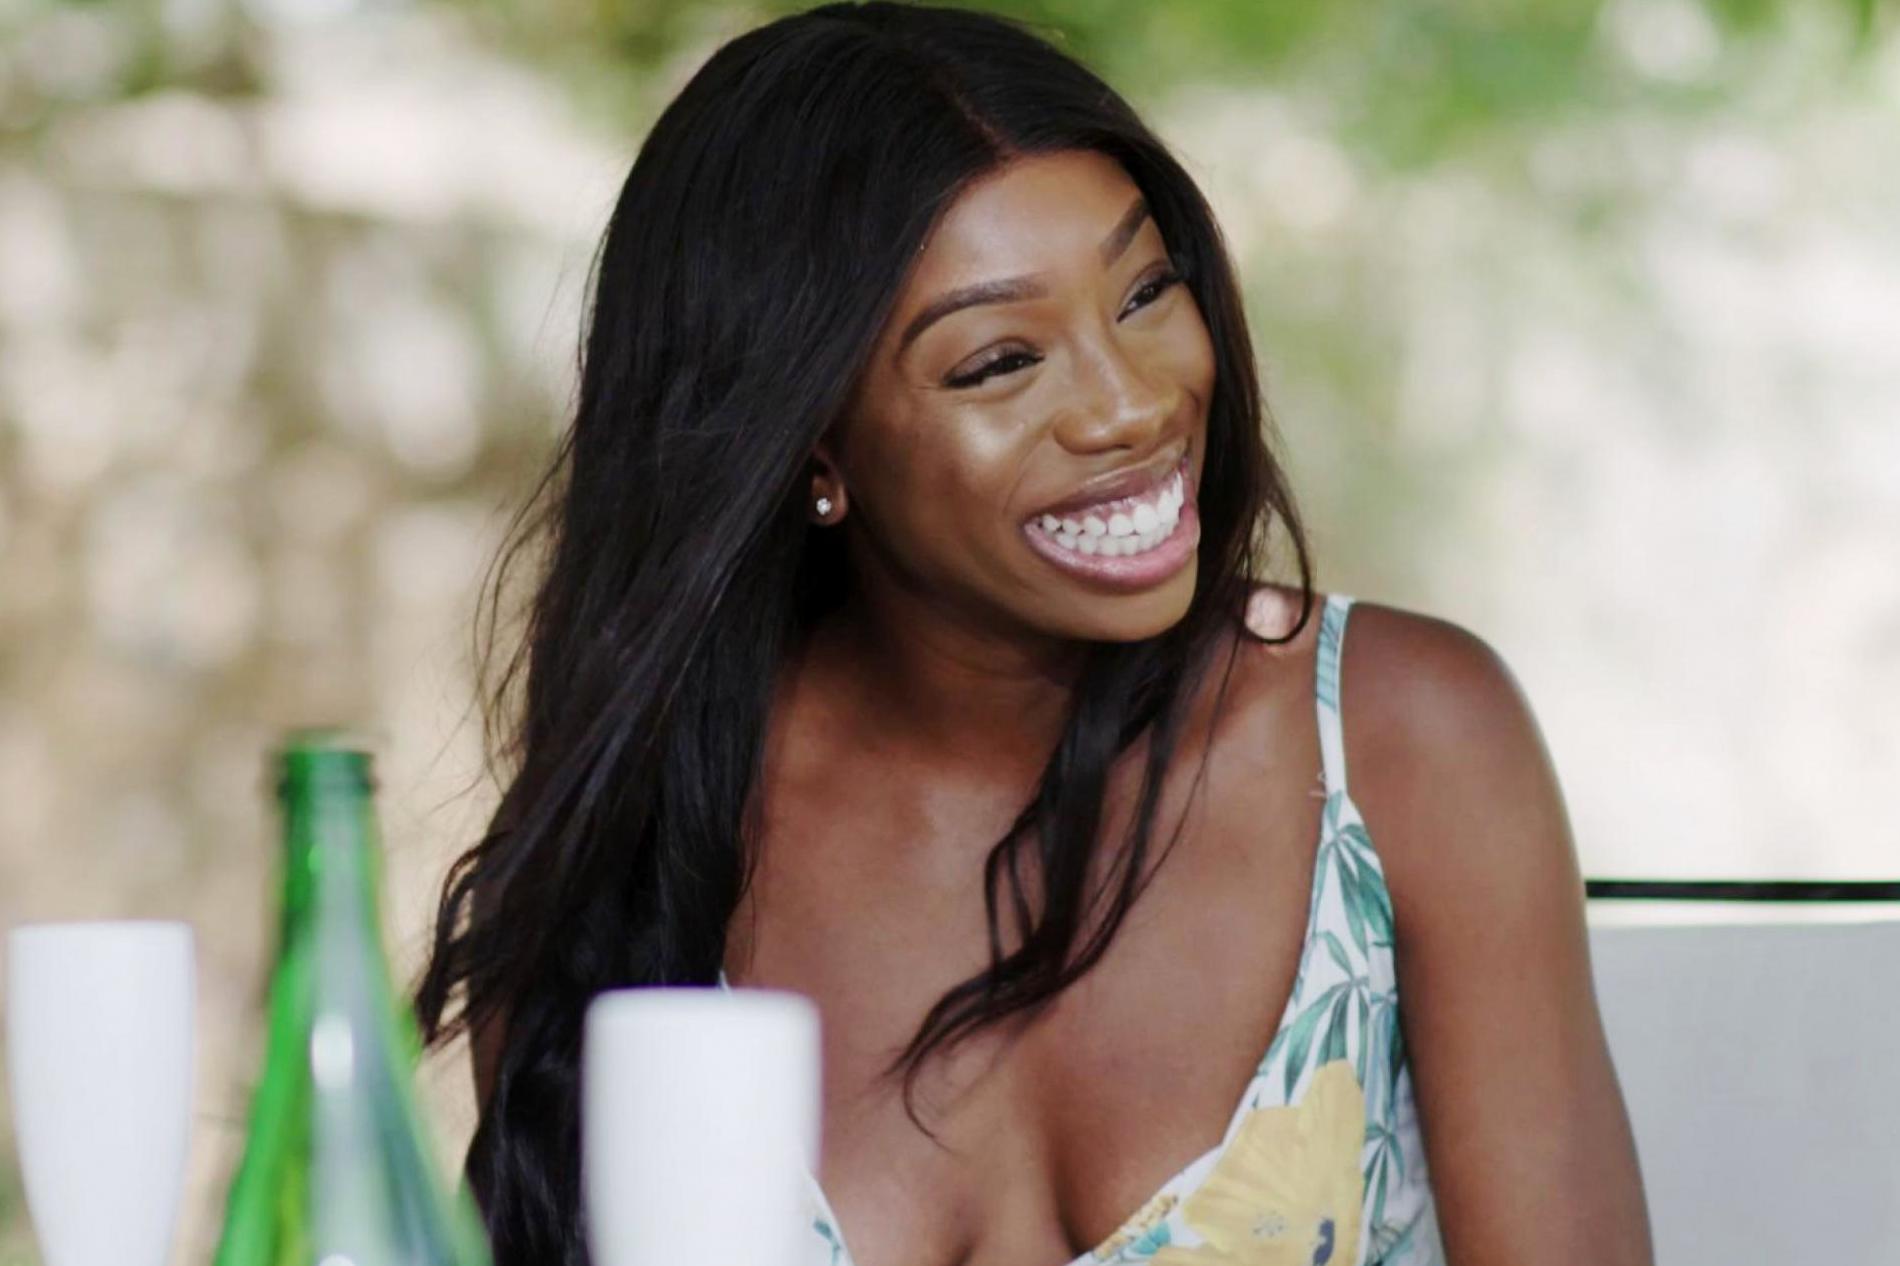 Yewande shares a date with Danny on Love Island